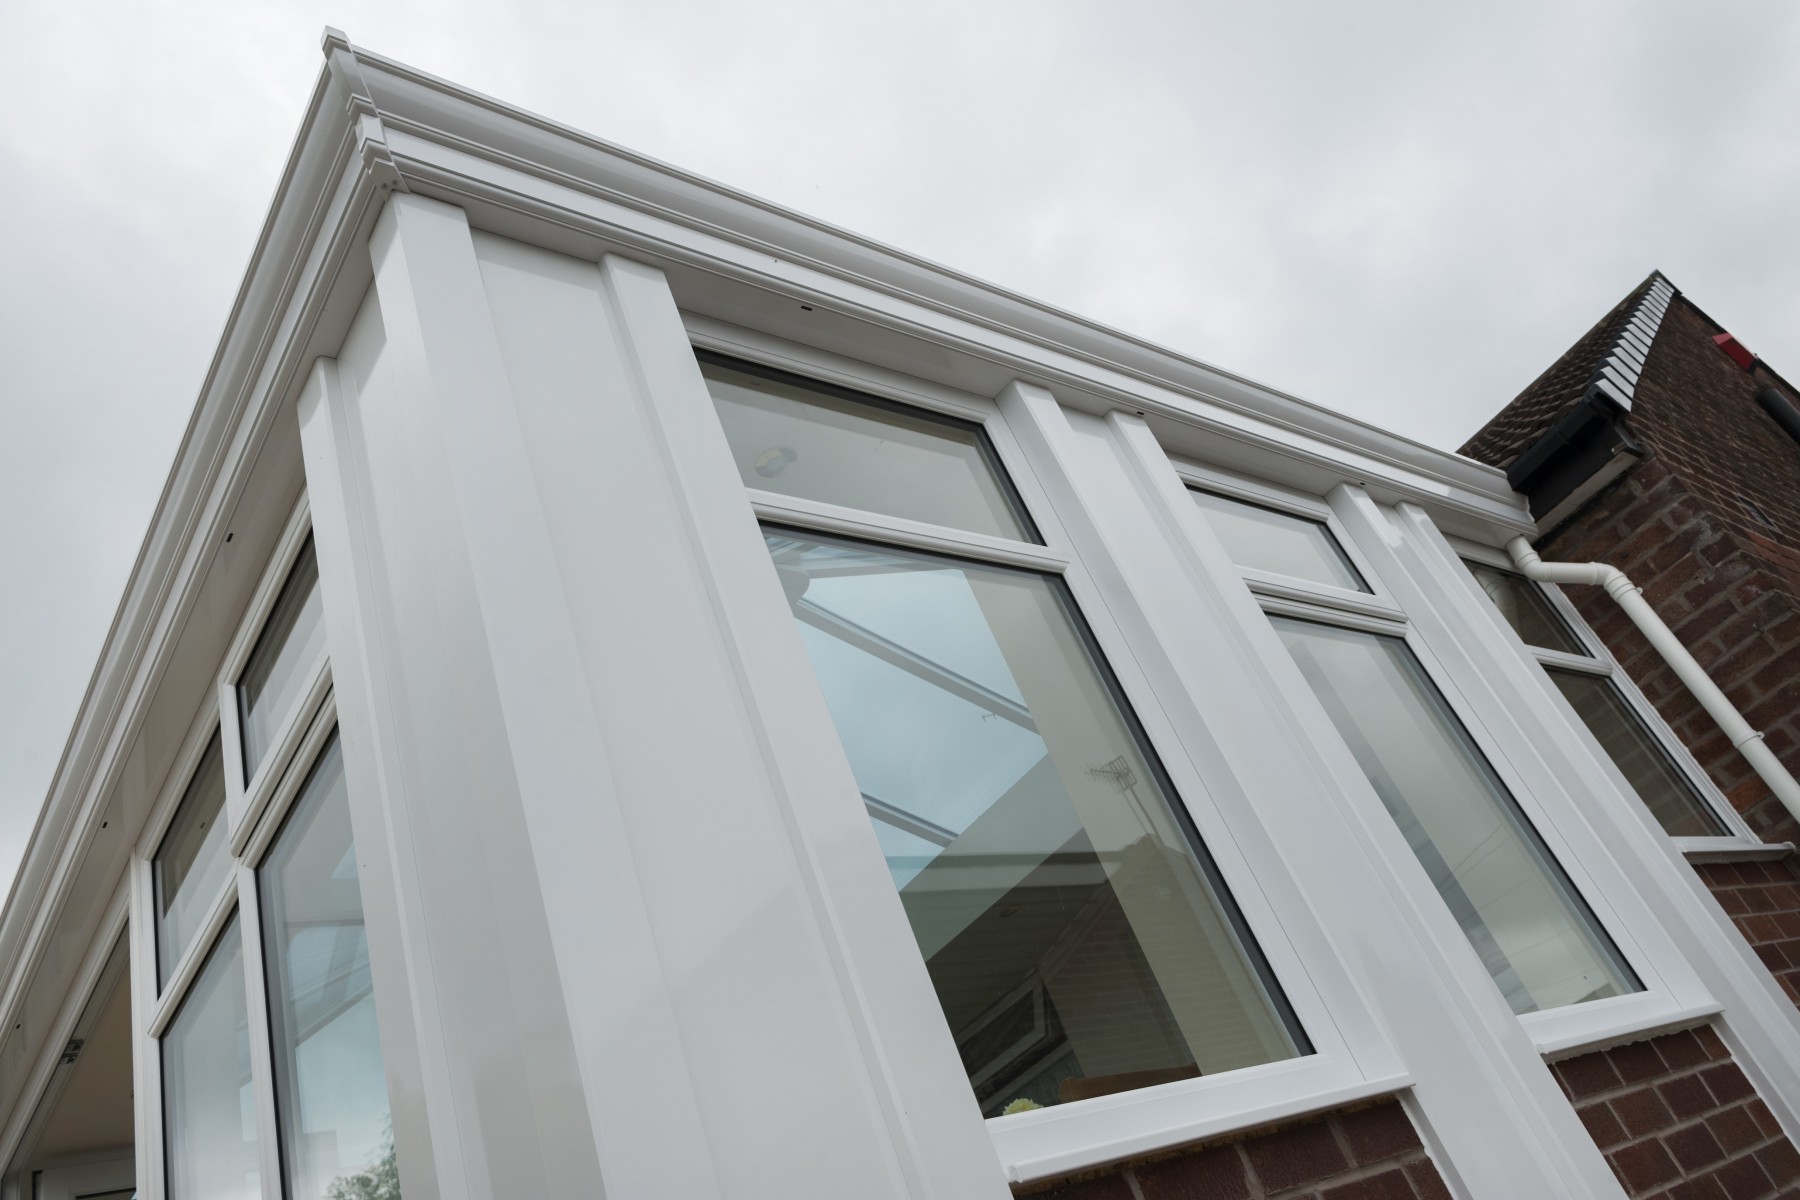 Close-up of Super Insulated Columns in a Gable-End Conservatory, highlighting their superior thermal efficiency and modern aesthetic, which contributes to energy savings and durability